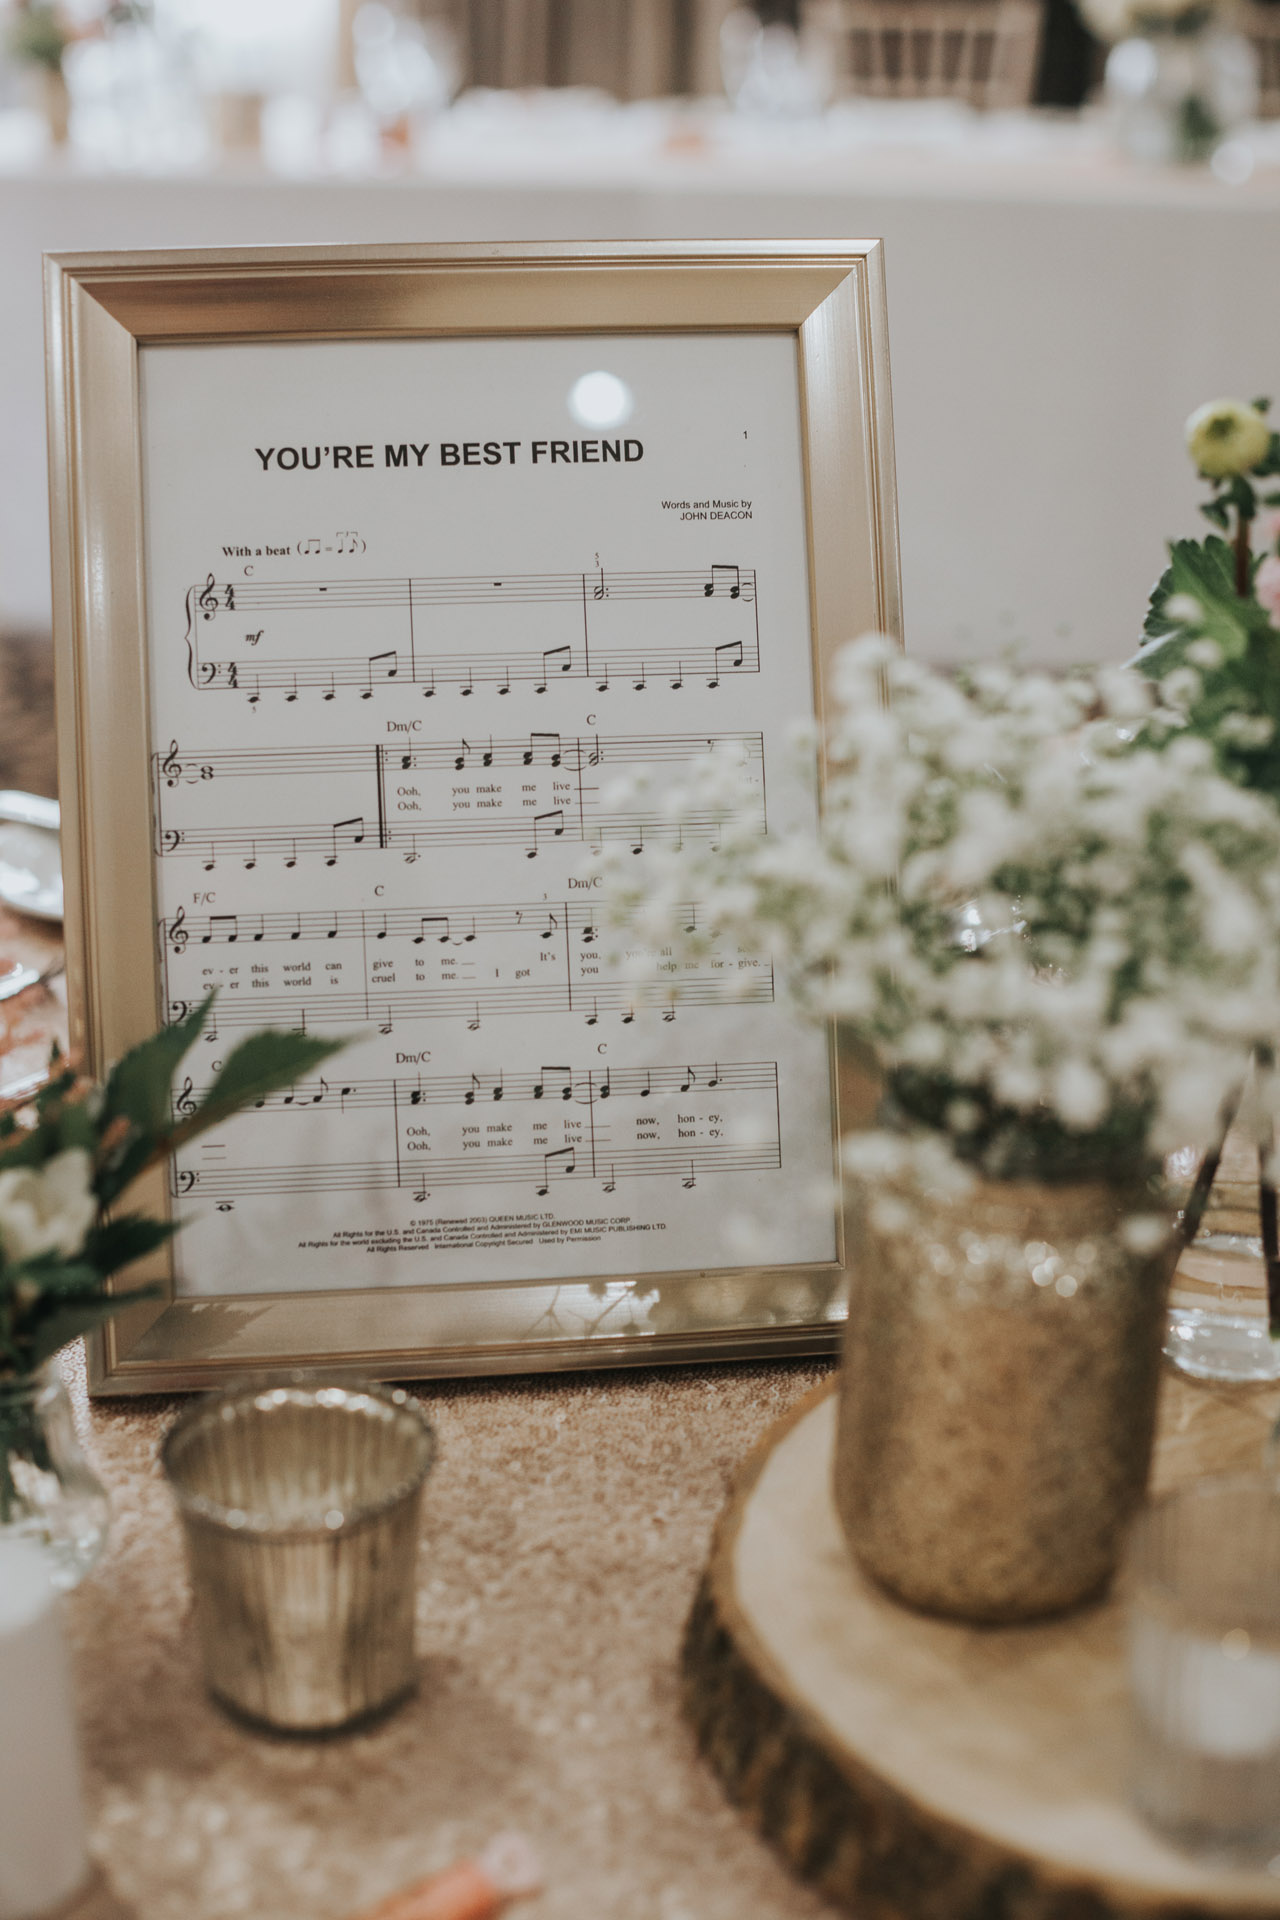 You are my best friend, sheet music, table decor. 